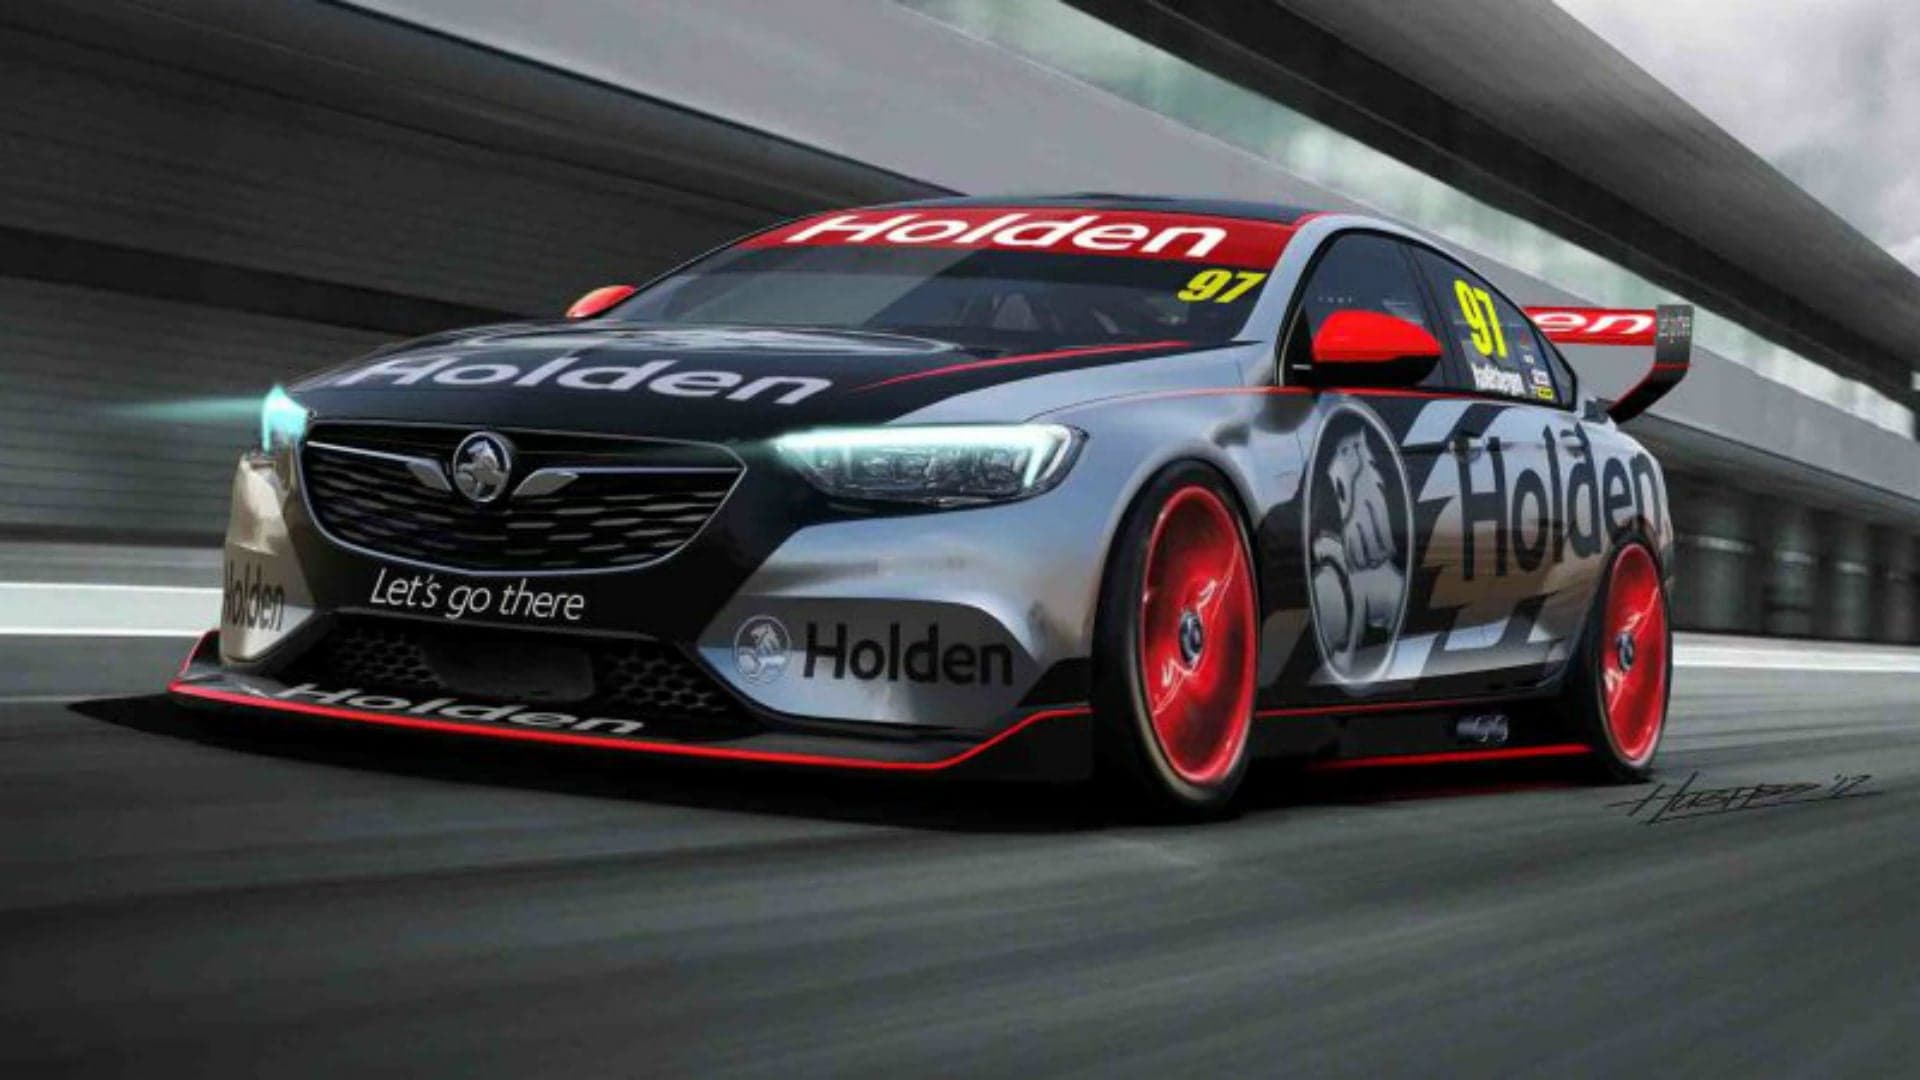 The New Holden Commodore V8 Supercar Racer Is the Sexiest Buick Regal Ever